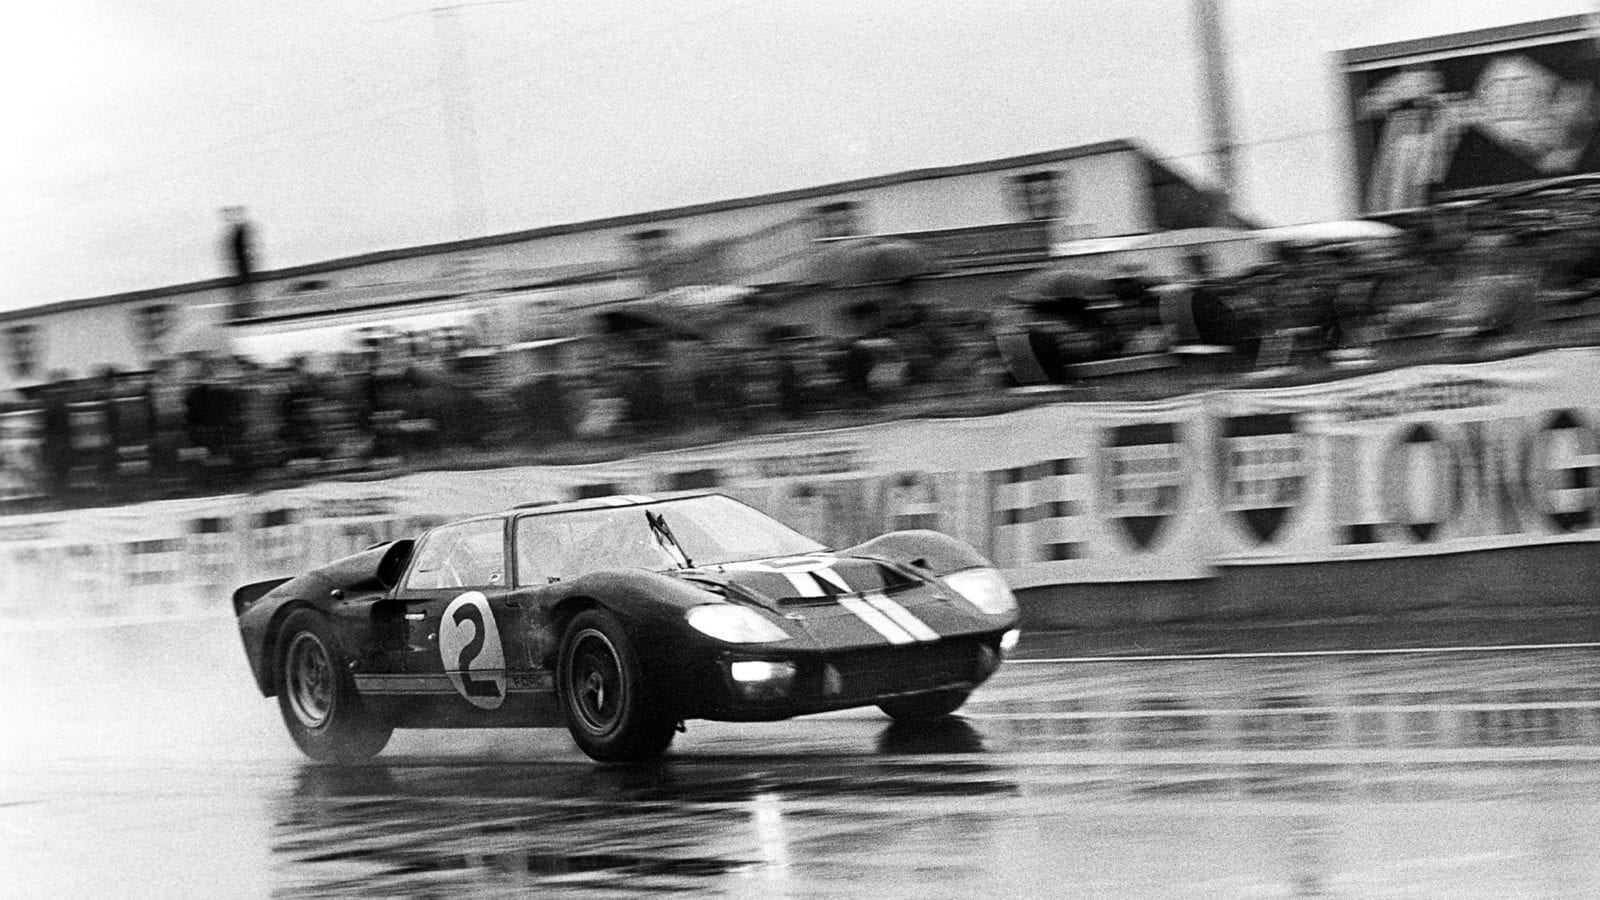 Chris Amon, Bruce McLaren, Ford Mk II, 24 Hours of Le Mans, Le Mans, 19 June 1966. The Ford Mk II of Bruce McLaren and Chris Zamon racing towards victory in the 1966 24 Hours of Le Mans. (Photo by Bernard Cahier/Getty Images)